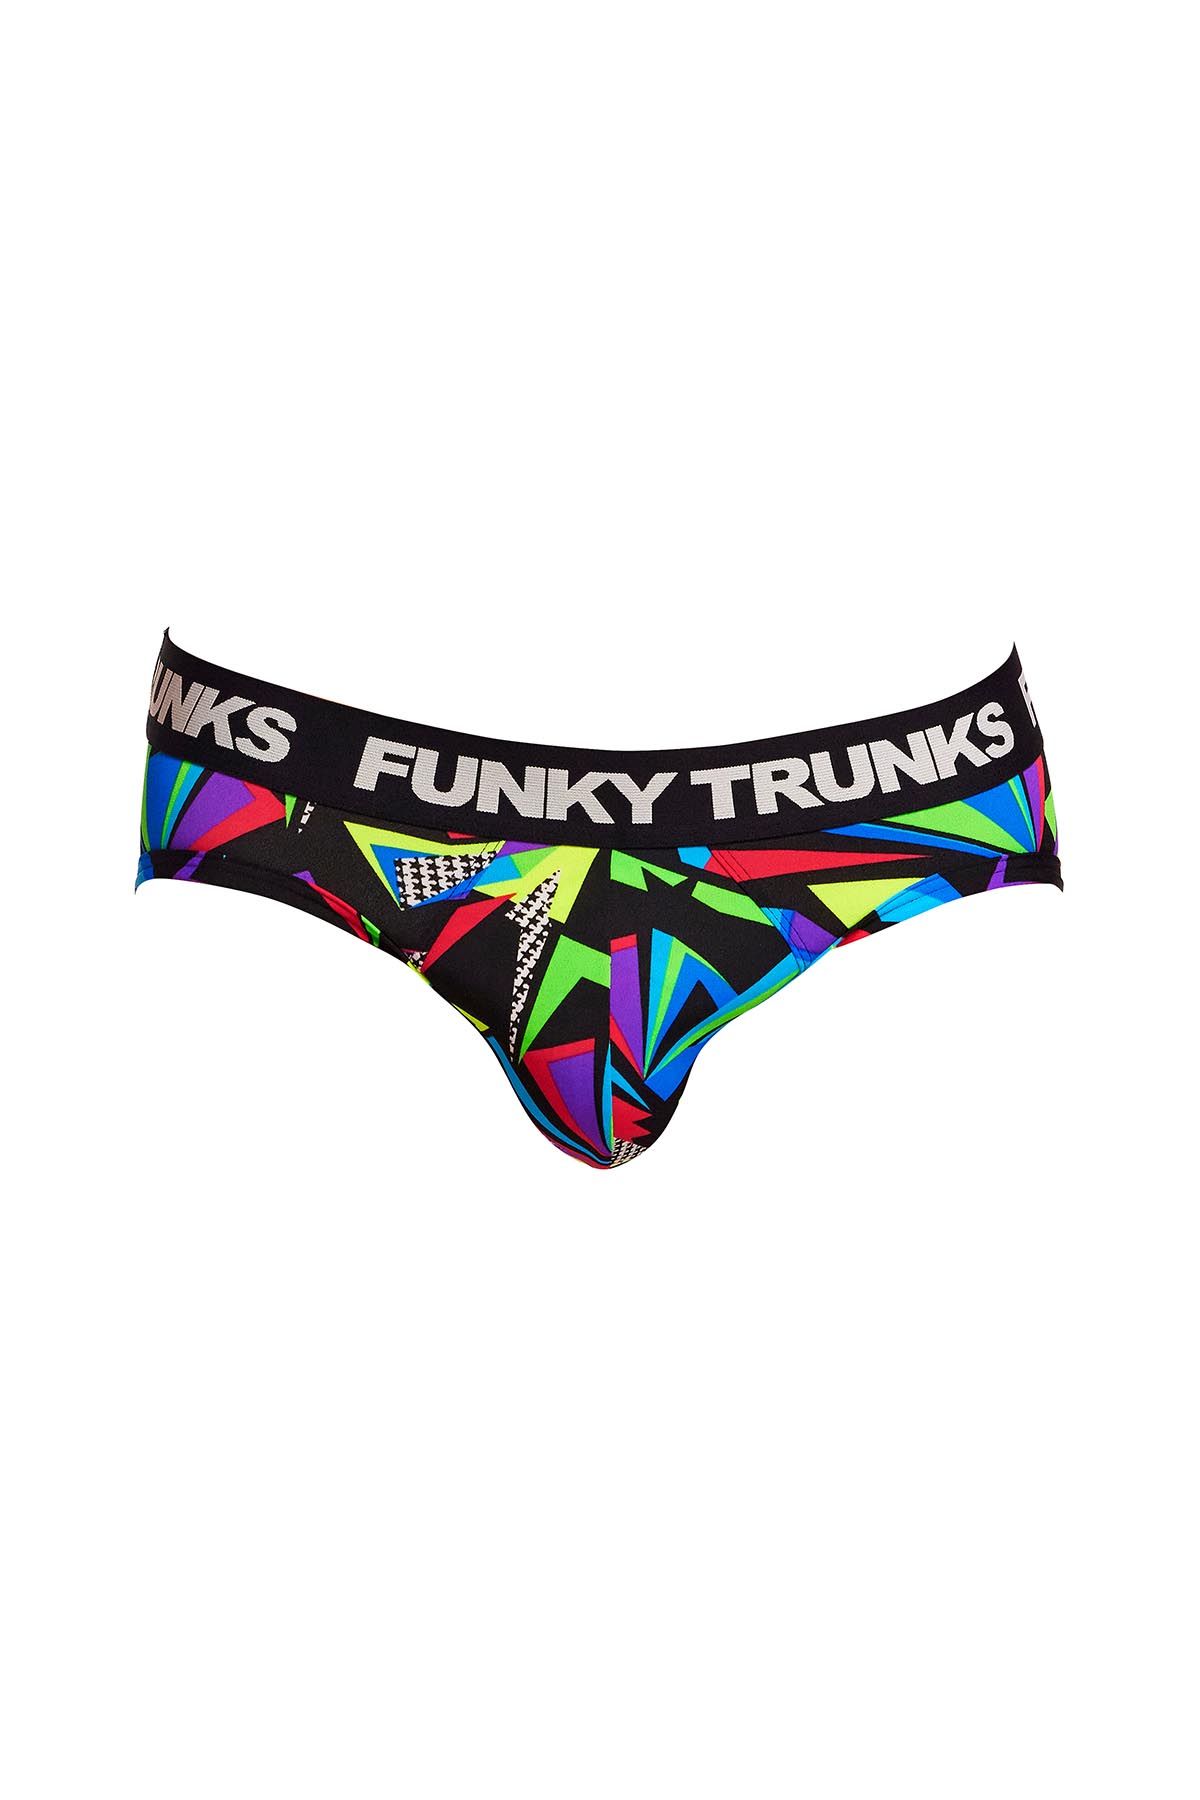 Funky Trunks Official Online Store